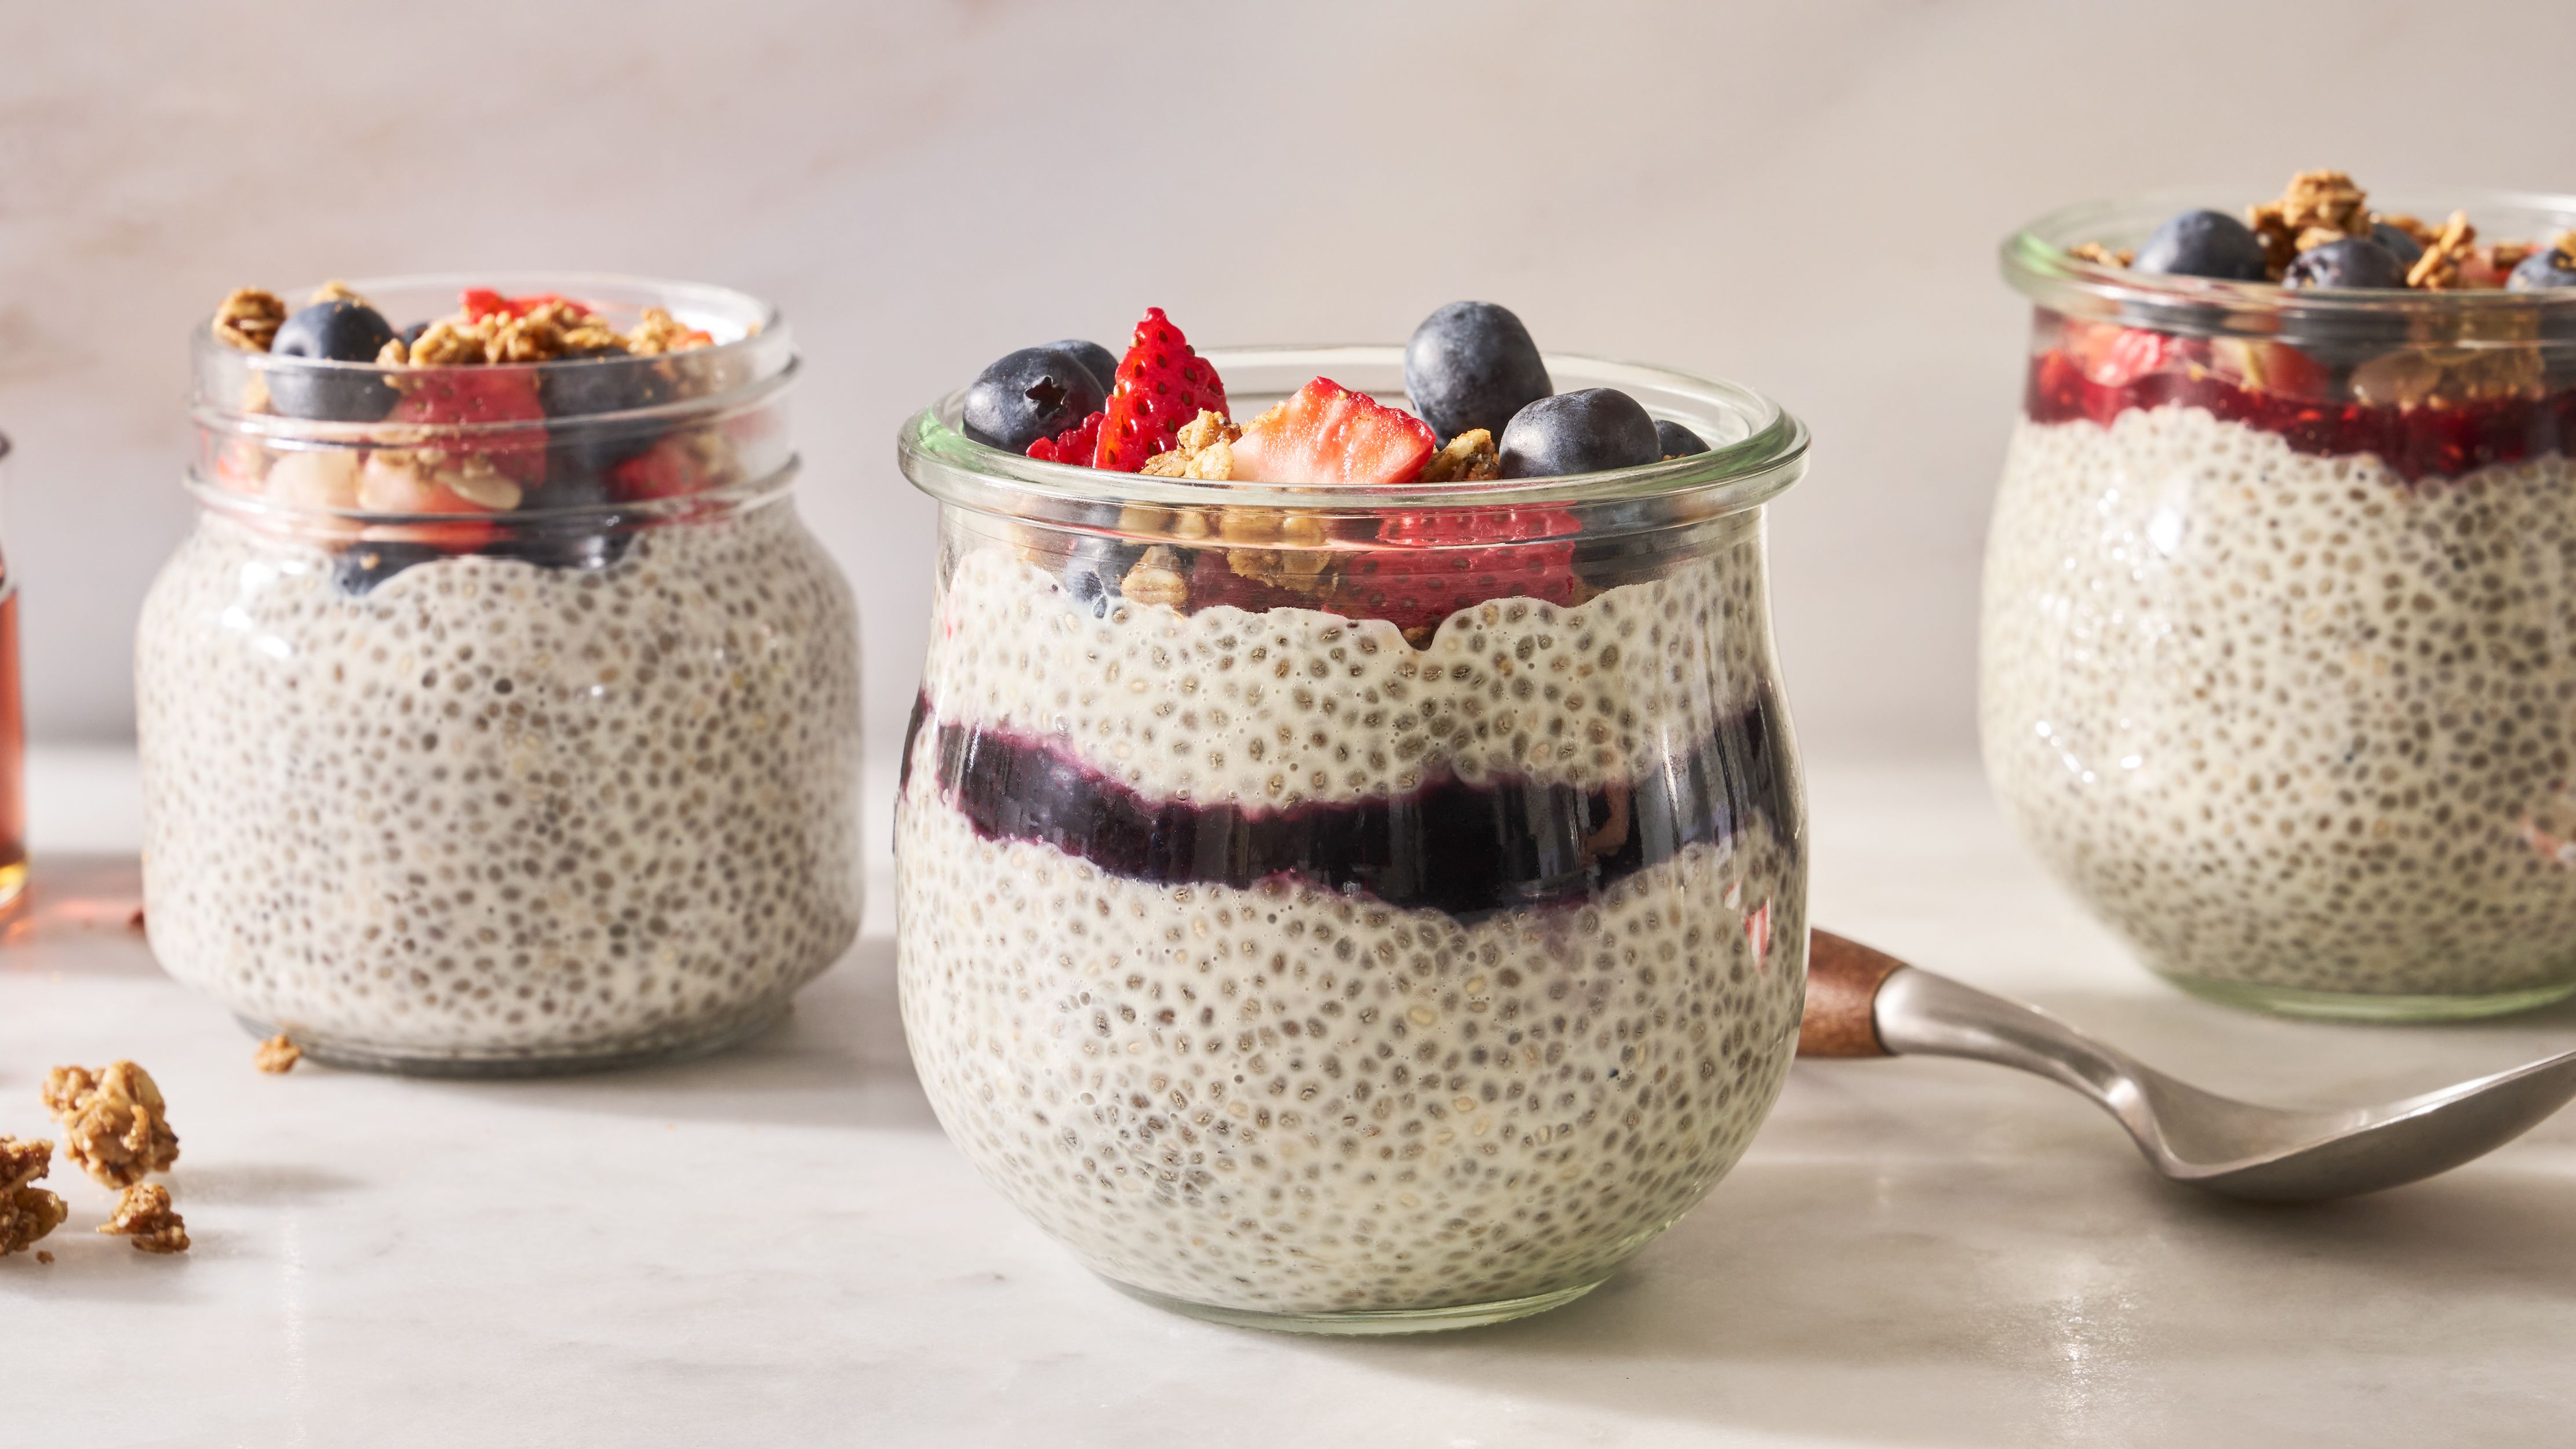 https://hips.hearstapps.com/hmg-prod/images/chia-pudding-index-649c90045f56c.jpg?crop=0.888711146659557xw:1xh;center,top